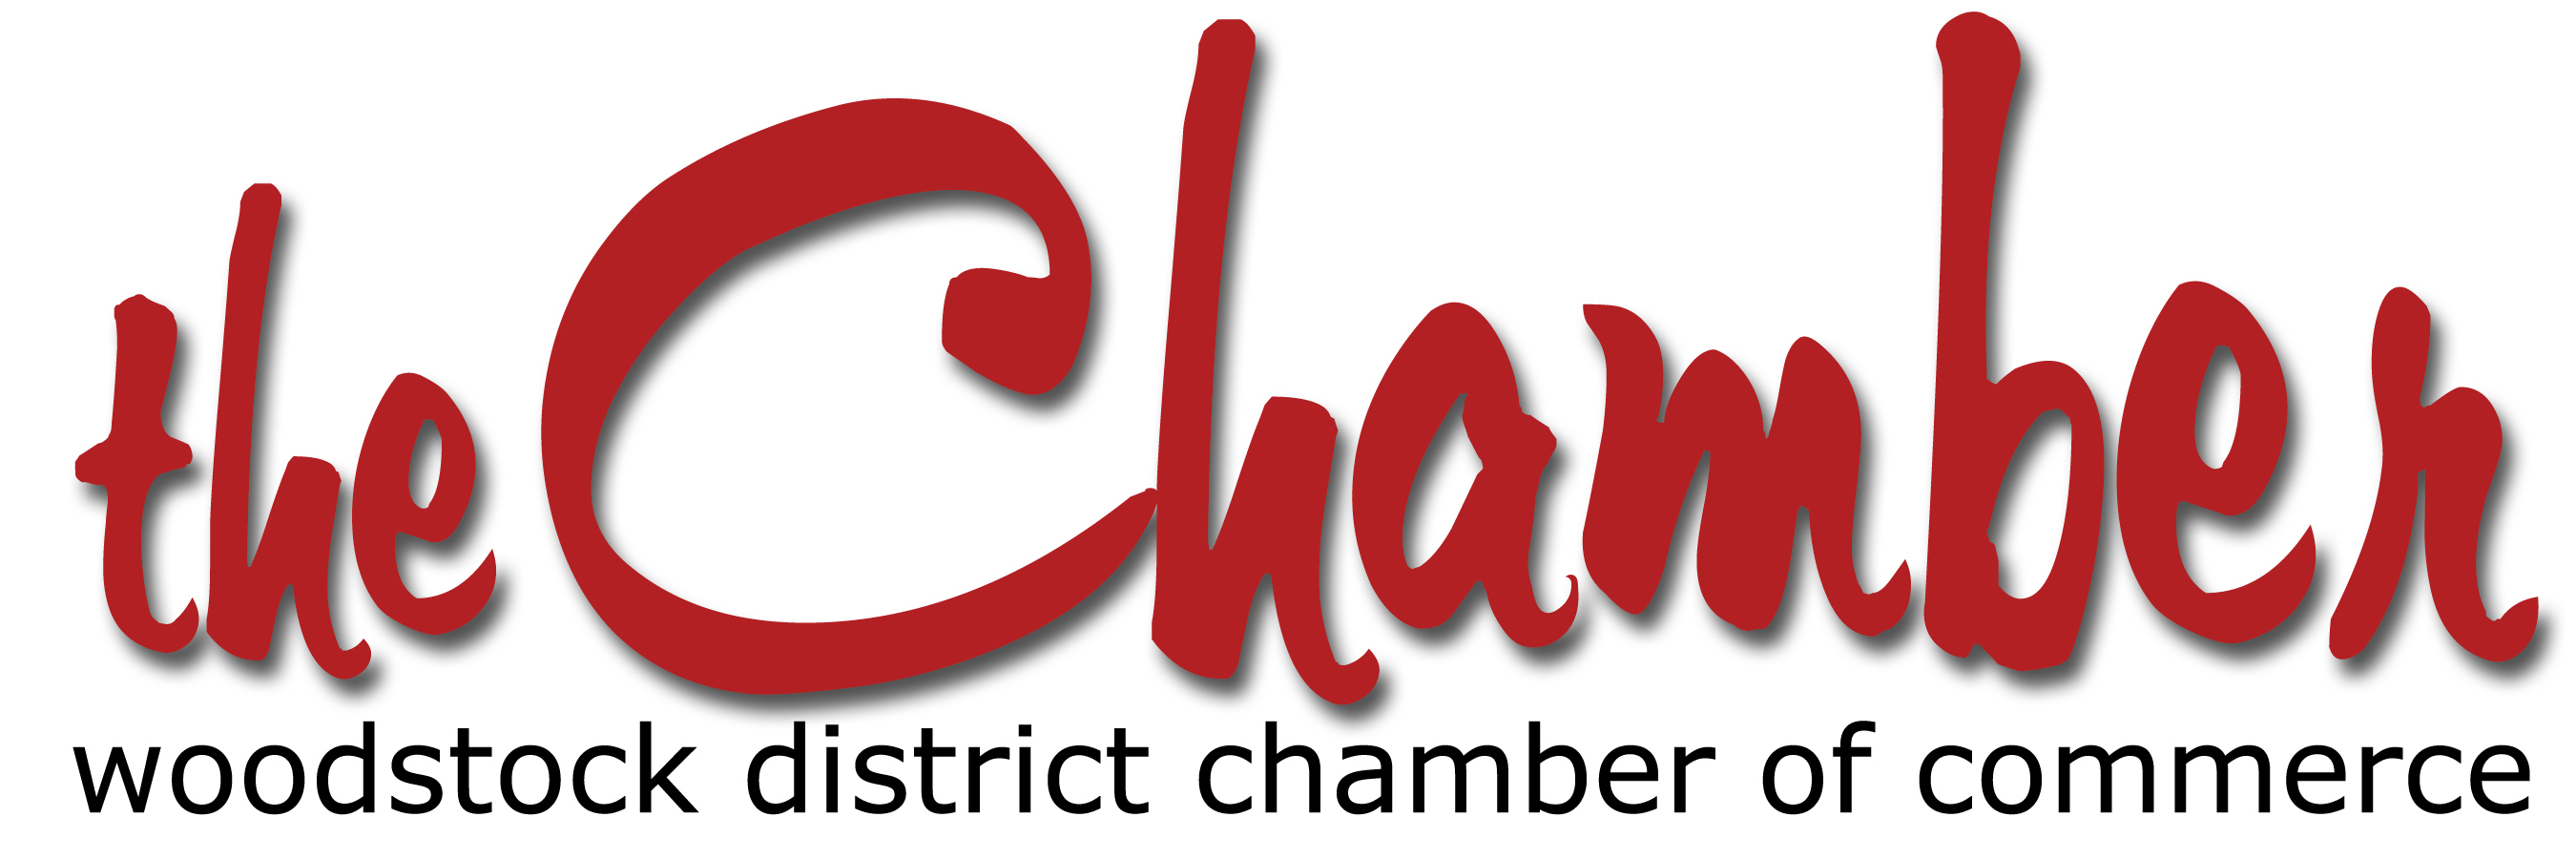 Woodstock District Chamber of Commerce